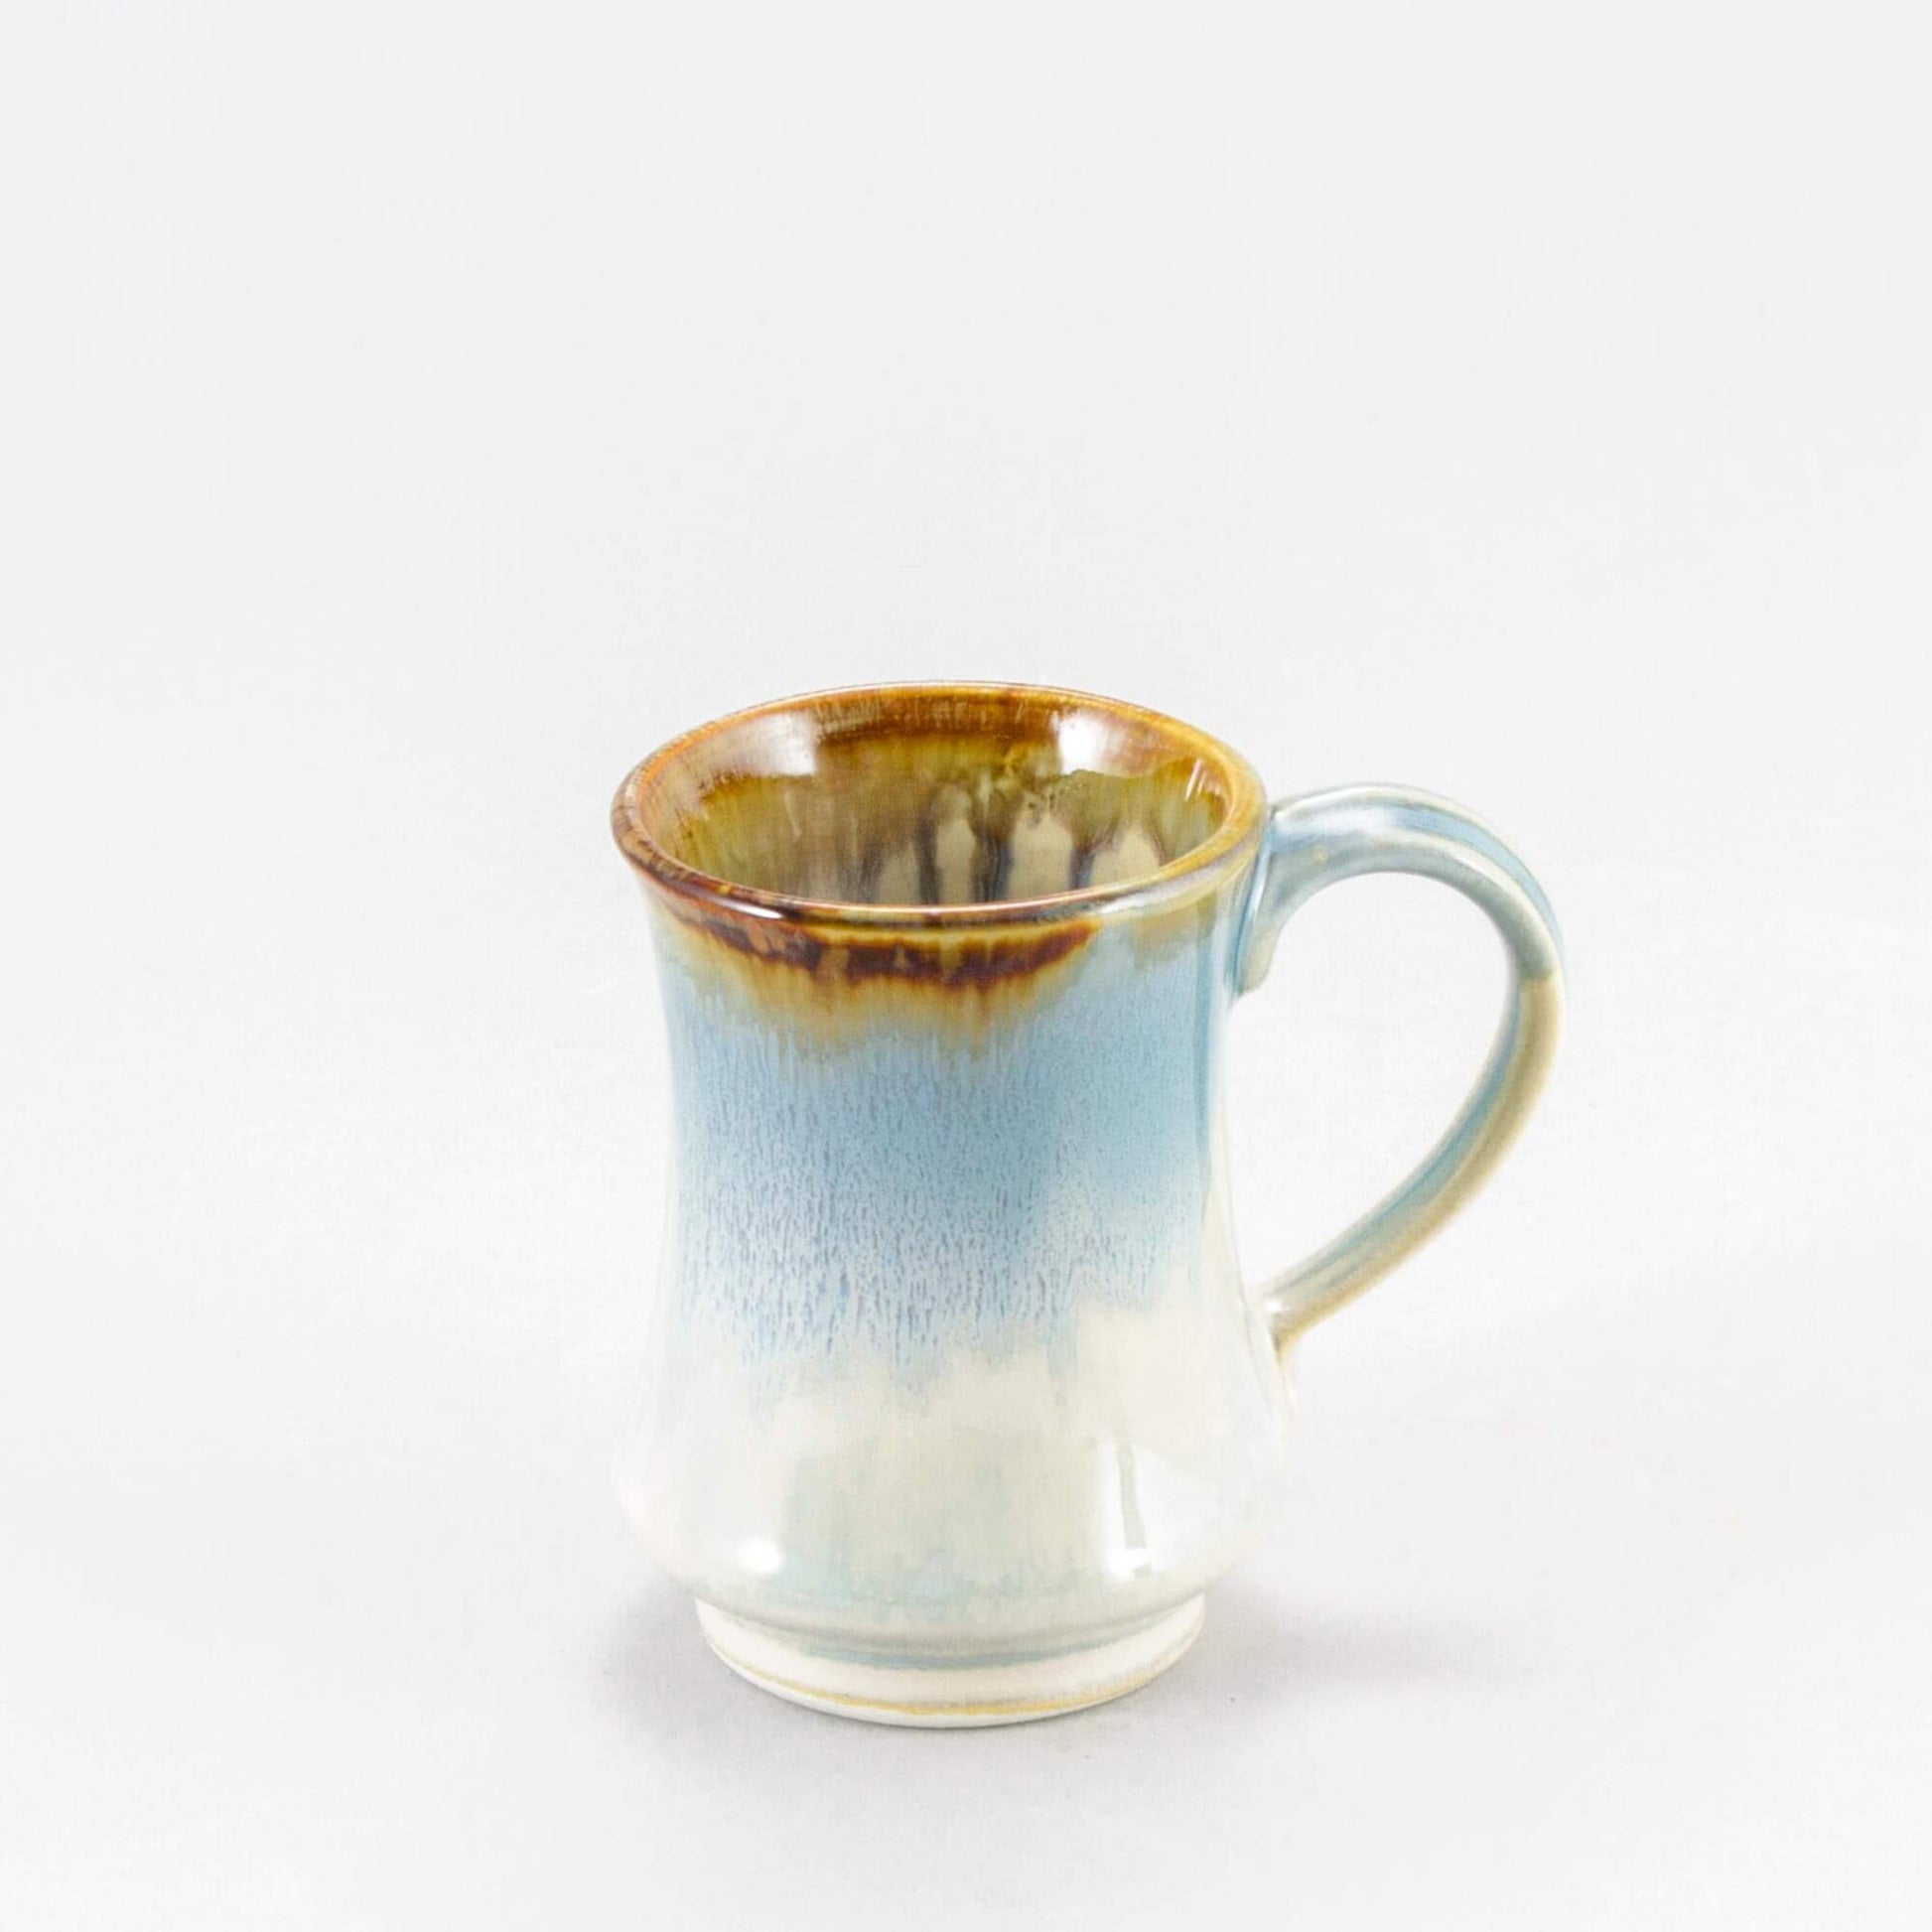 Handmade Pottery Pedestal Mug made by Georgetown Pottery in Maine Ivory & Blue